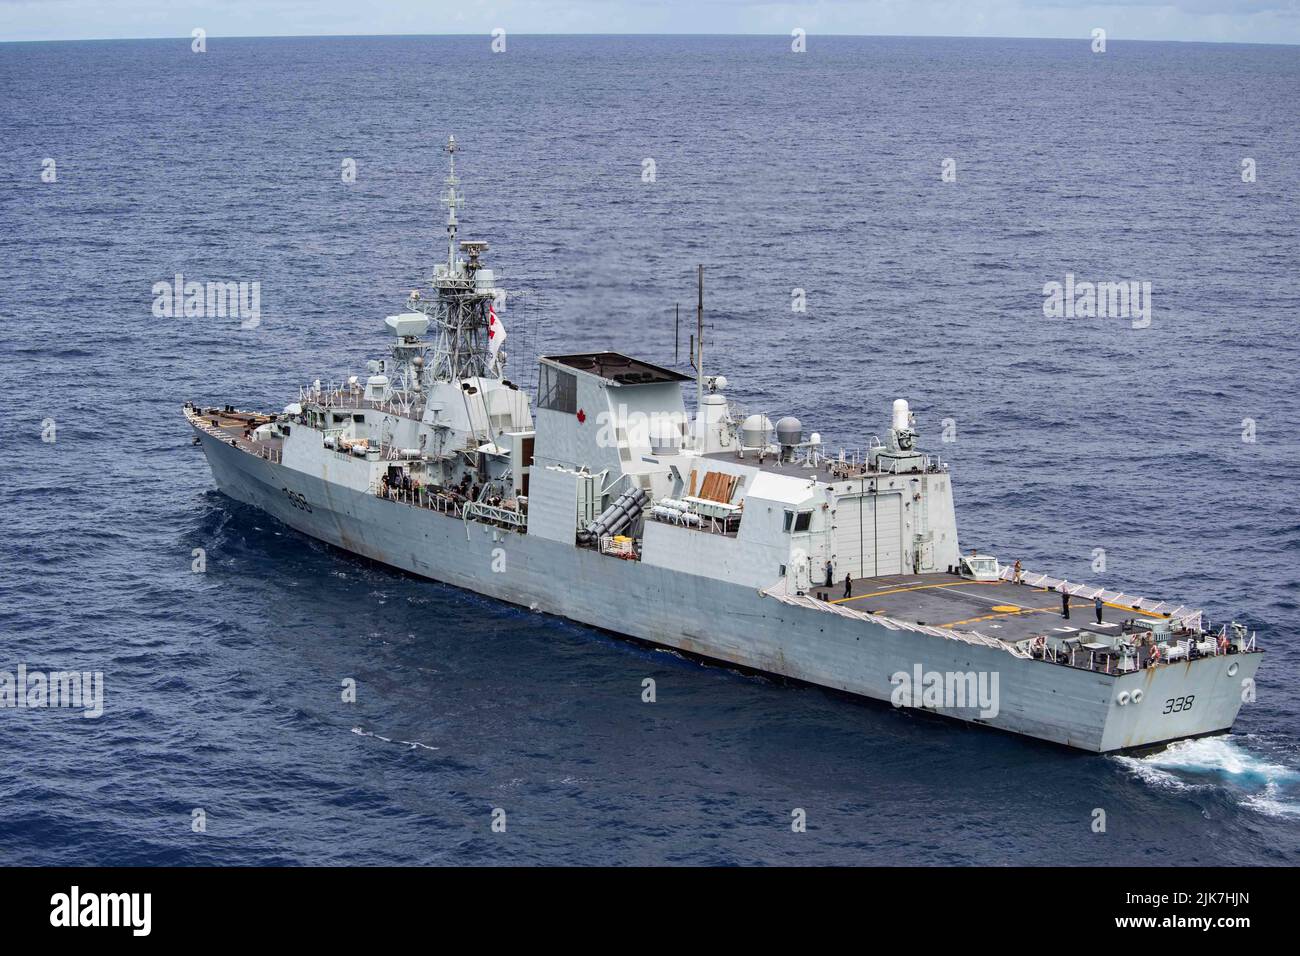 Pacific Ocean, United States. 28 July, 2022. The Royal Canadian Navy Halifax-class frigate HMCS Vancouver sails in formation during training operations at the Rim of the Pacific 2022 exercises, July 28, 2022 off the coast of Hawaii. Credit: MC3 Dylan Lavin/U.S. Navy/Alamy Live News Stock Photo